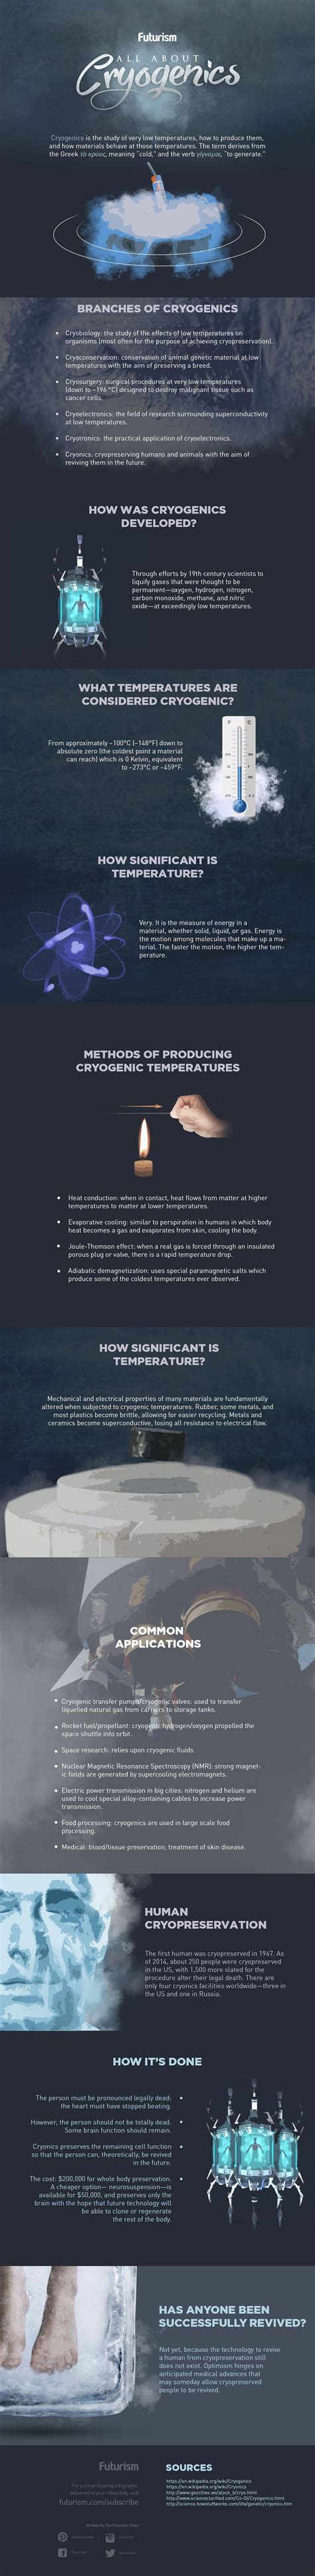 All About Cryogenics Infographic